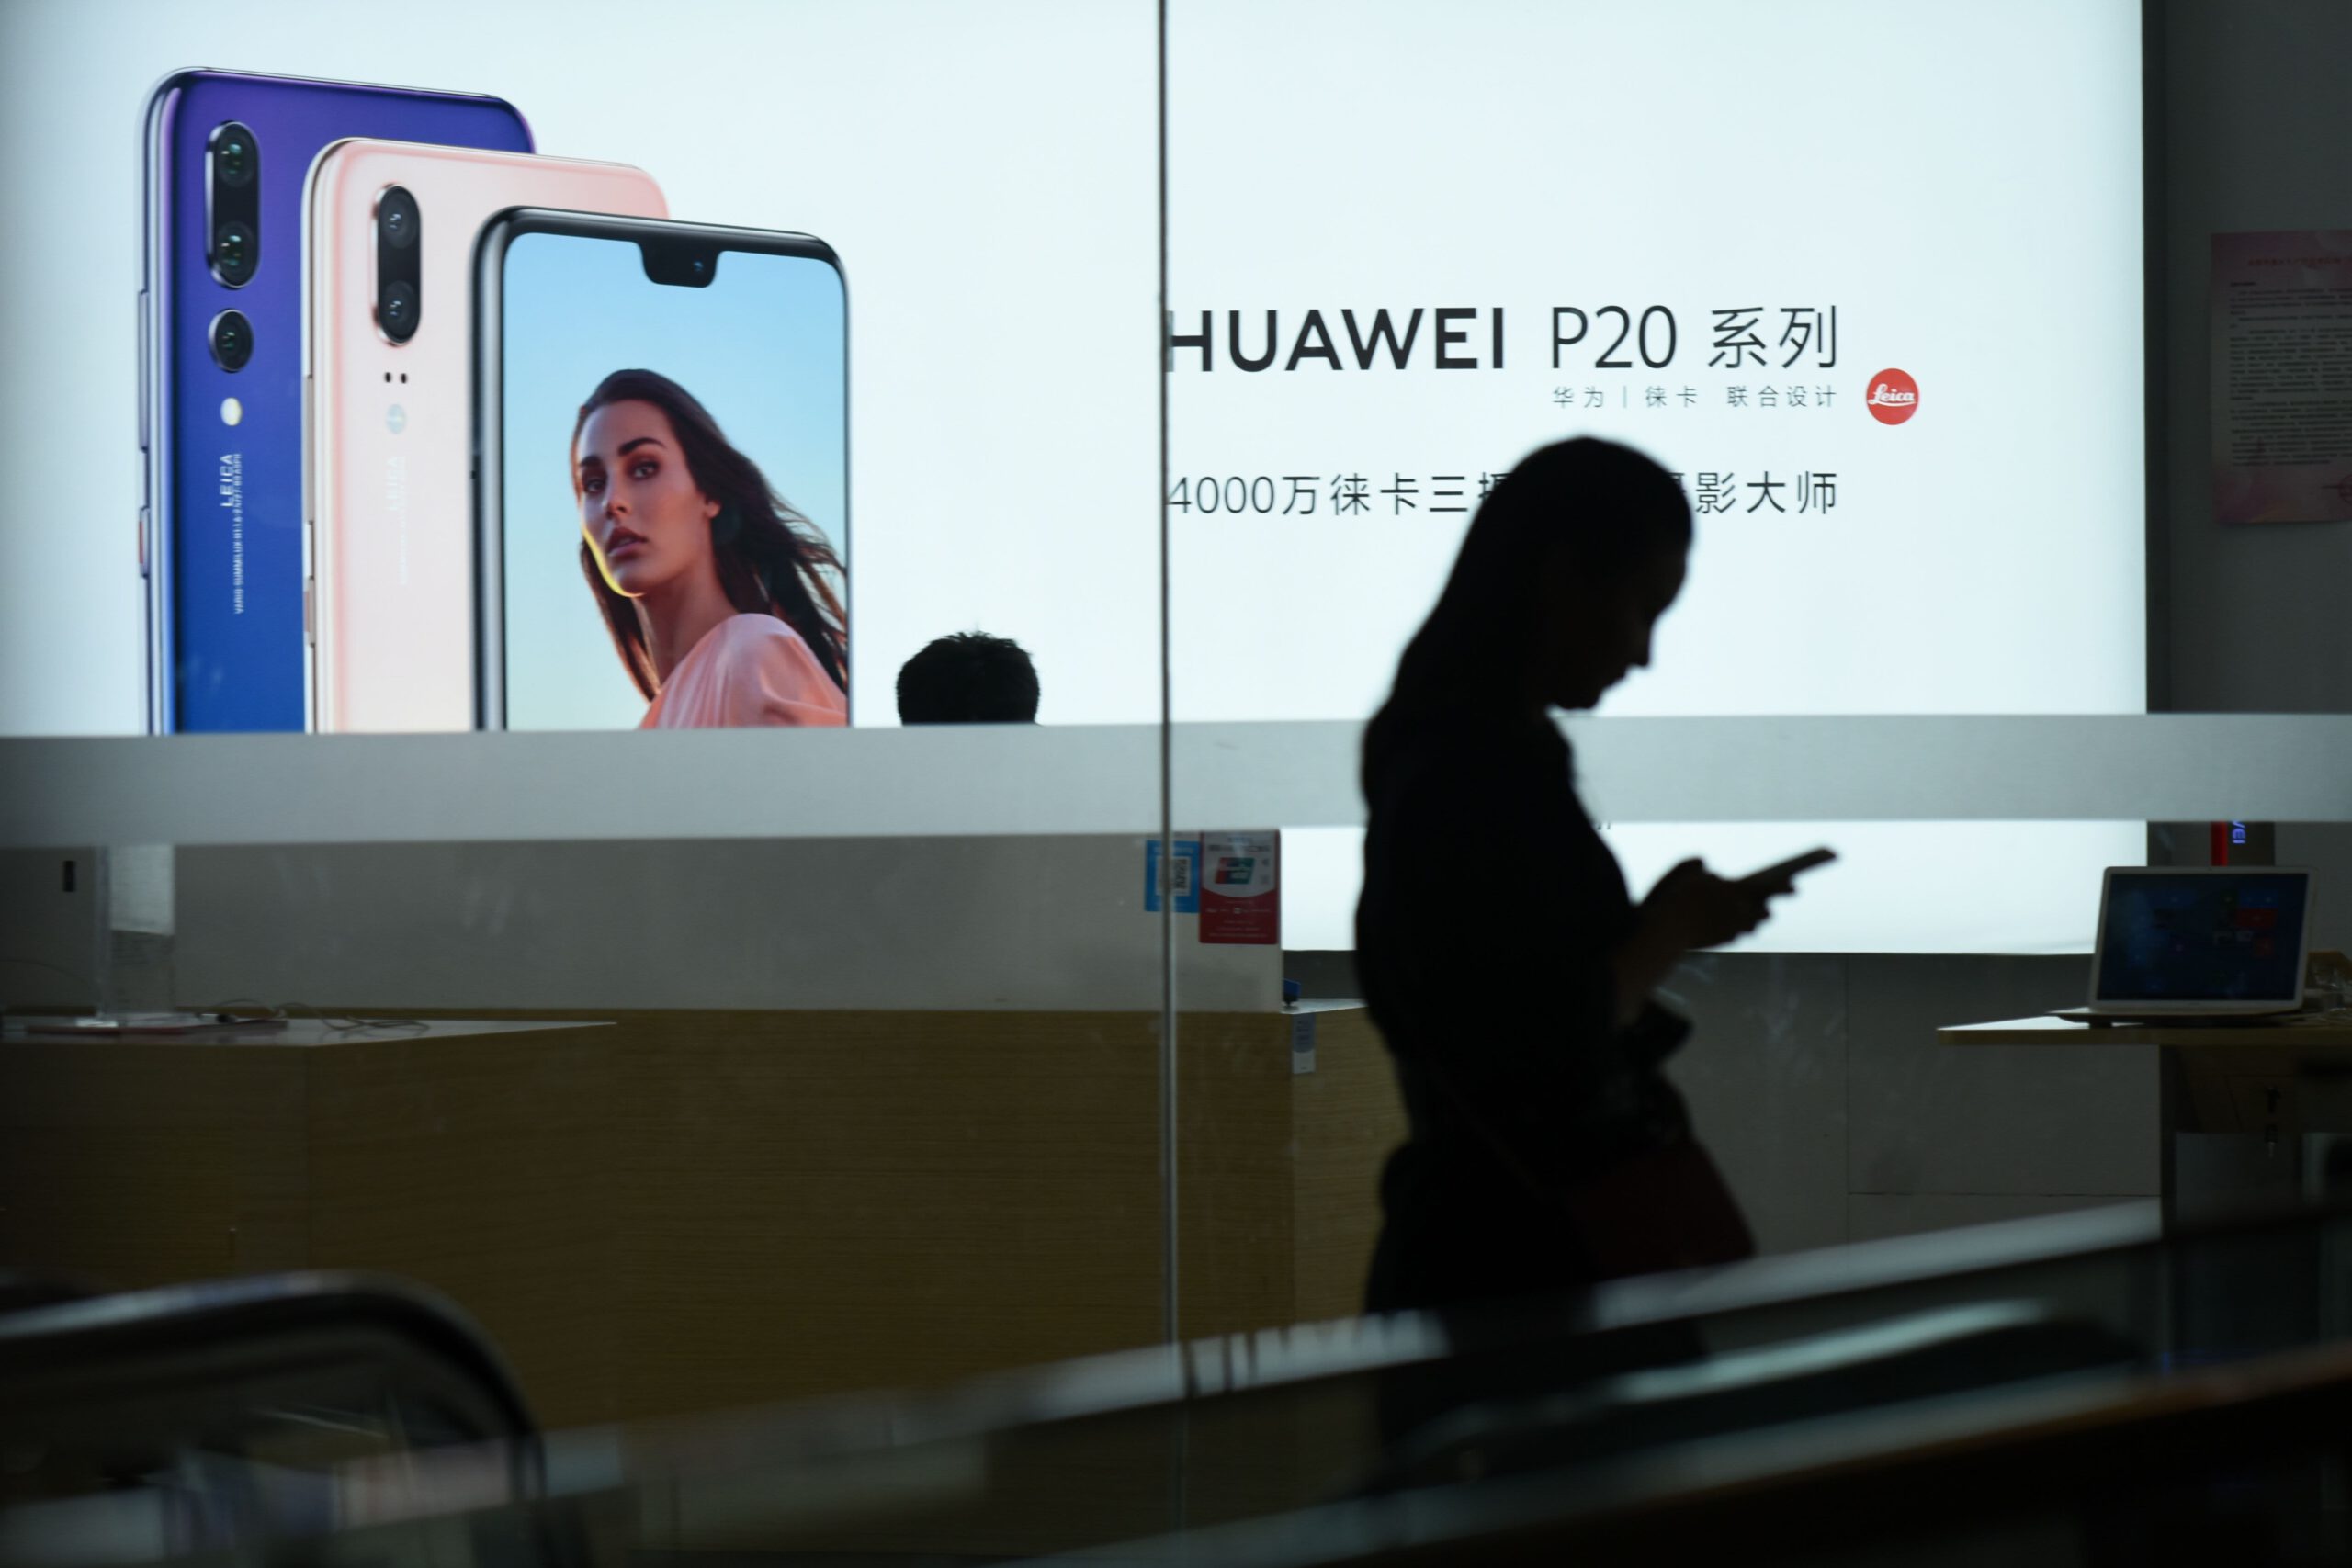 Huawei has not received a general amnesty from Trump